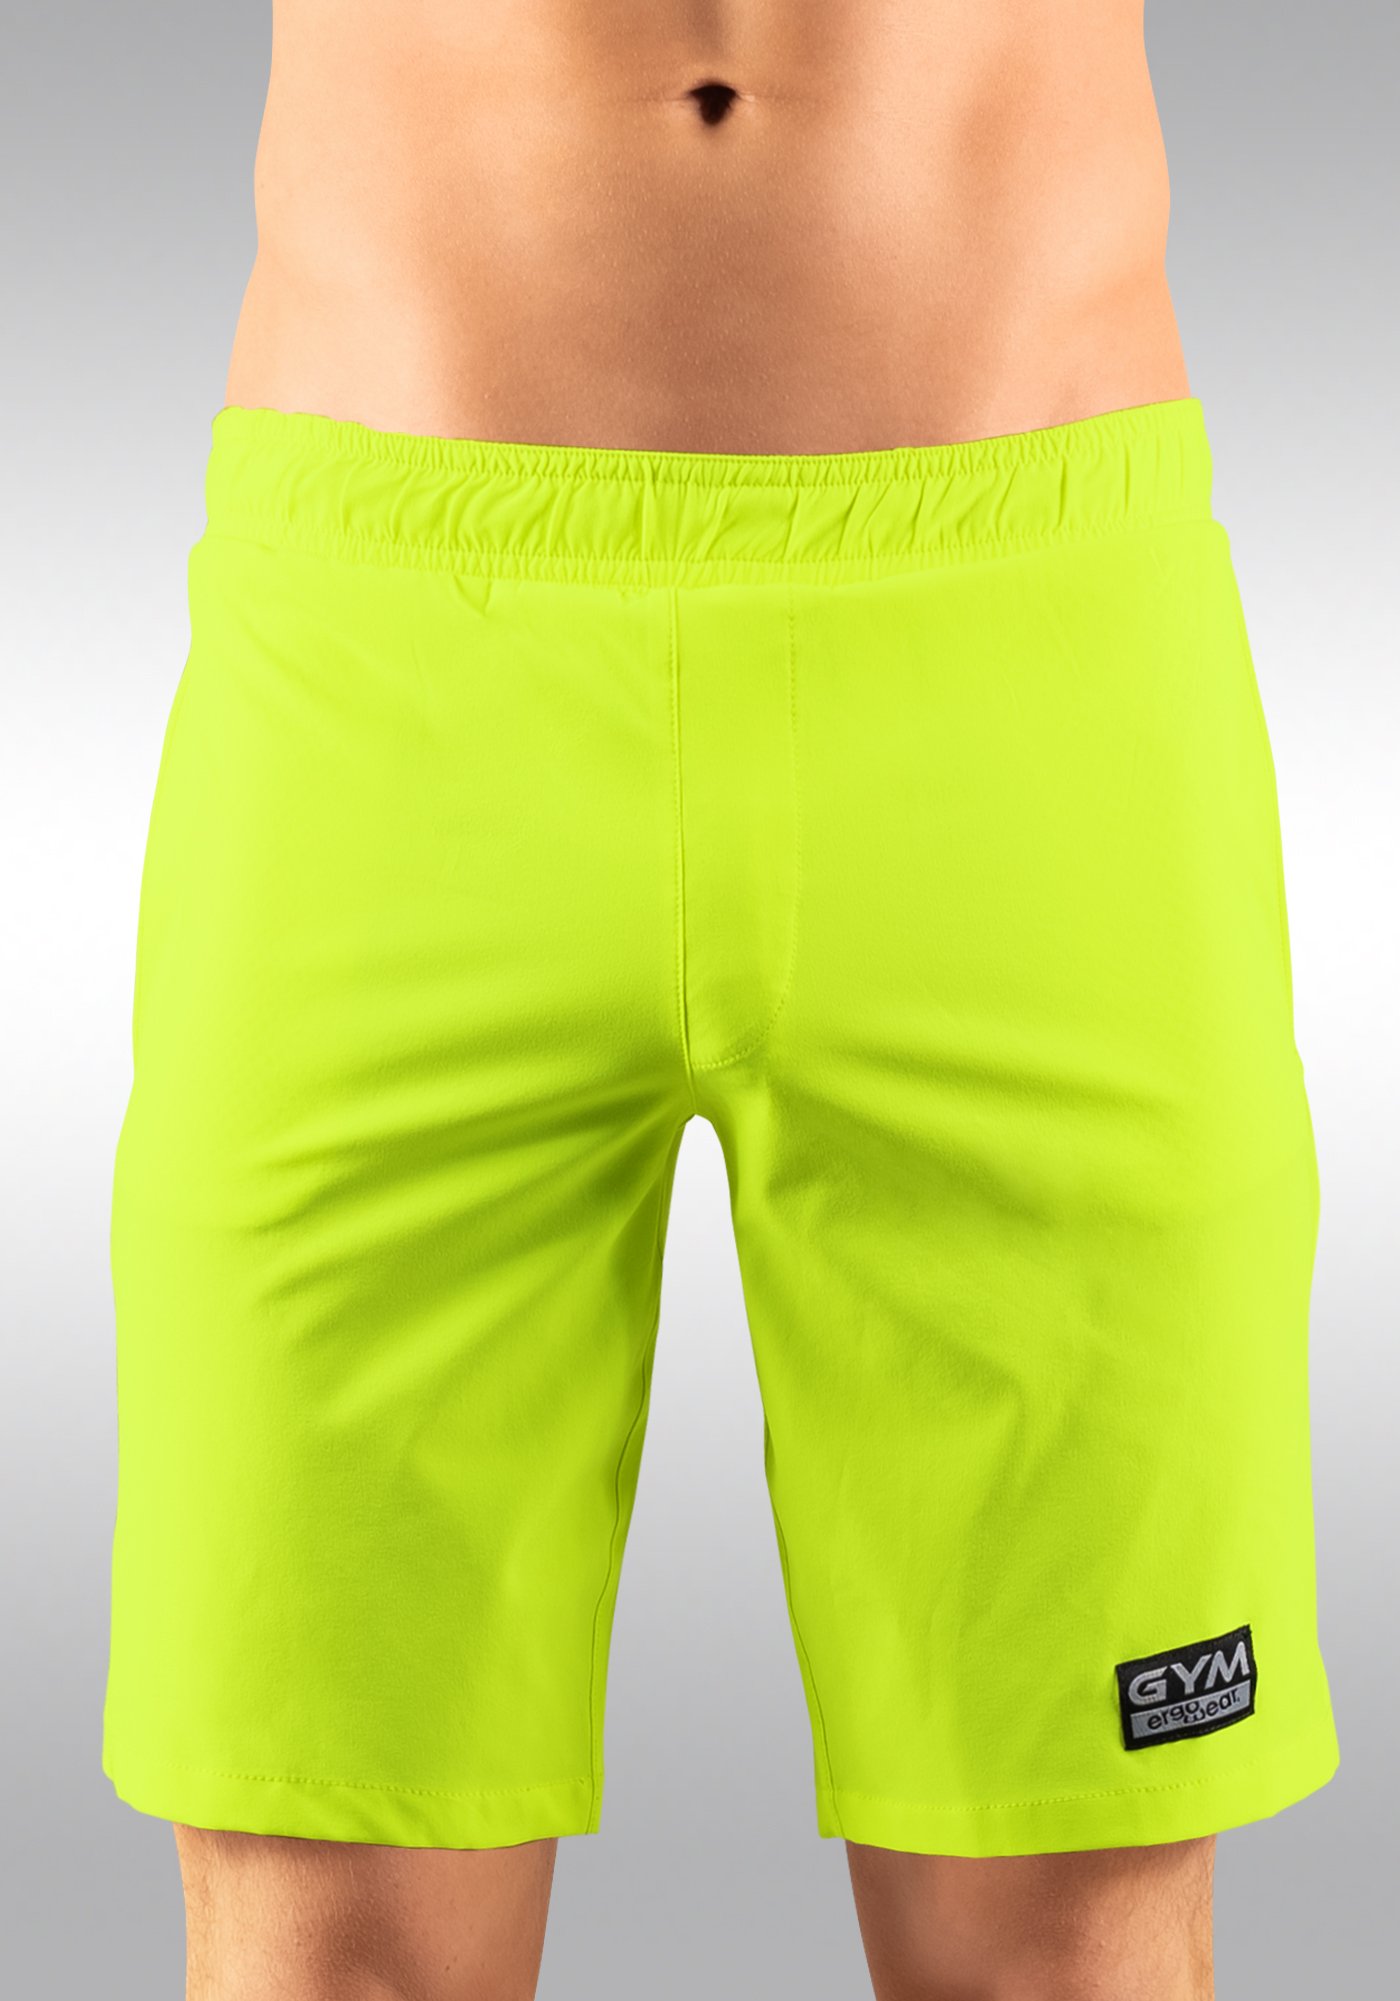 Board Short Yellow with Built In Pouch Underwear